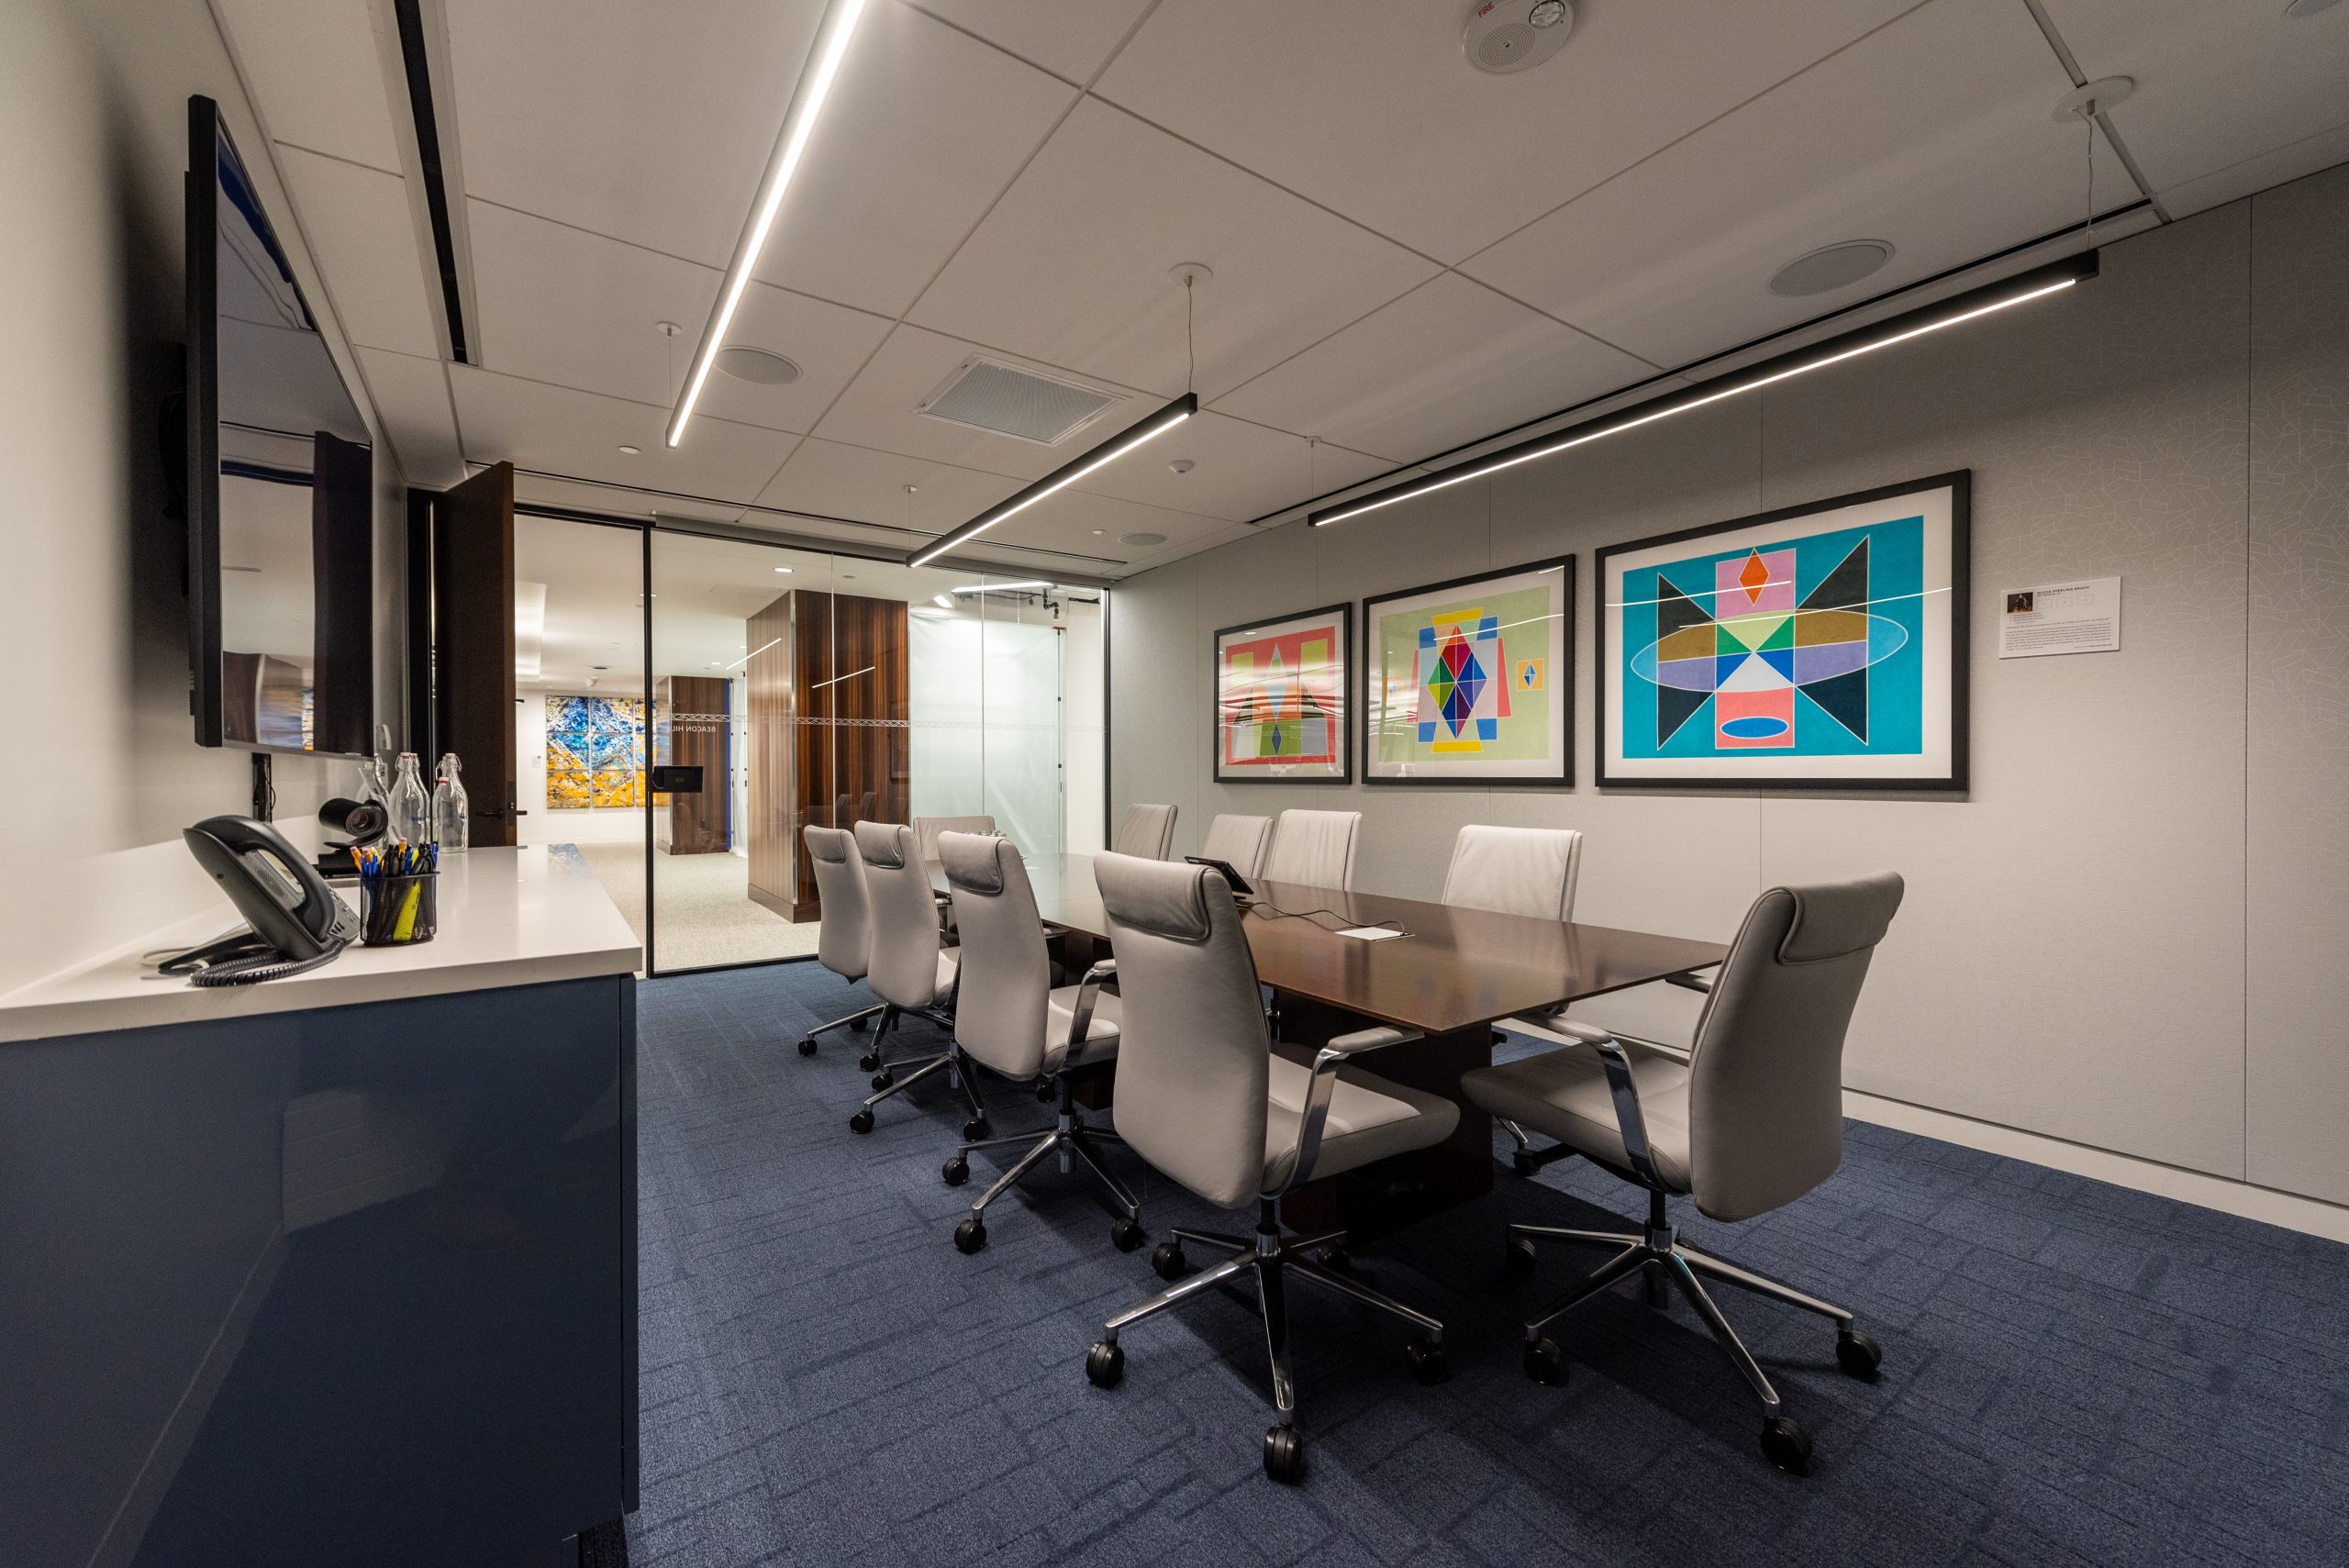 Fidelity Investments - Renovation of 10th and 11th Floors - Commodore  Builders